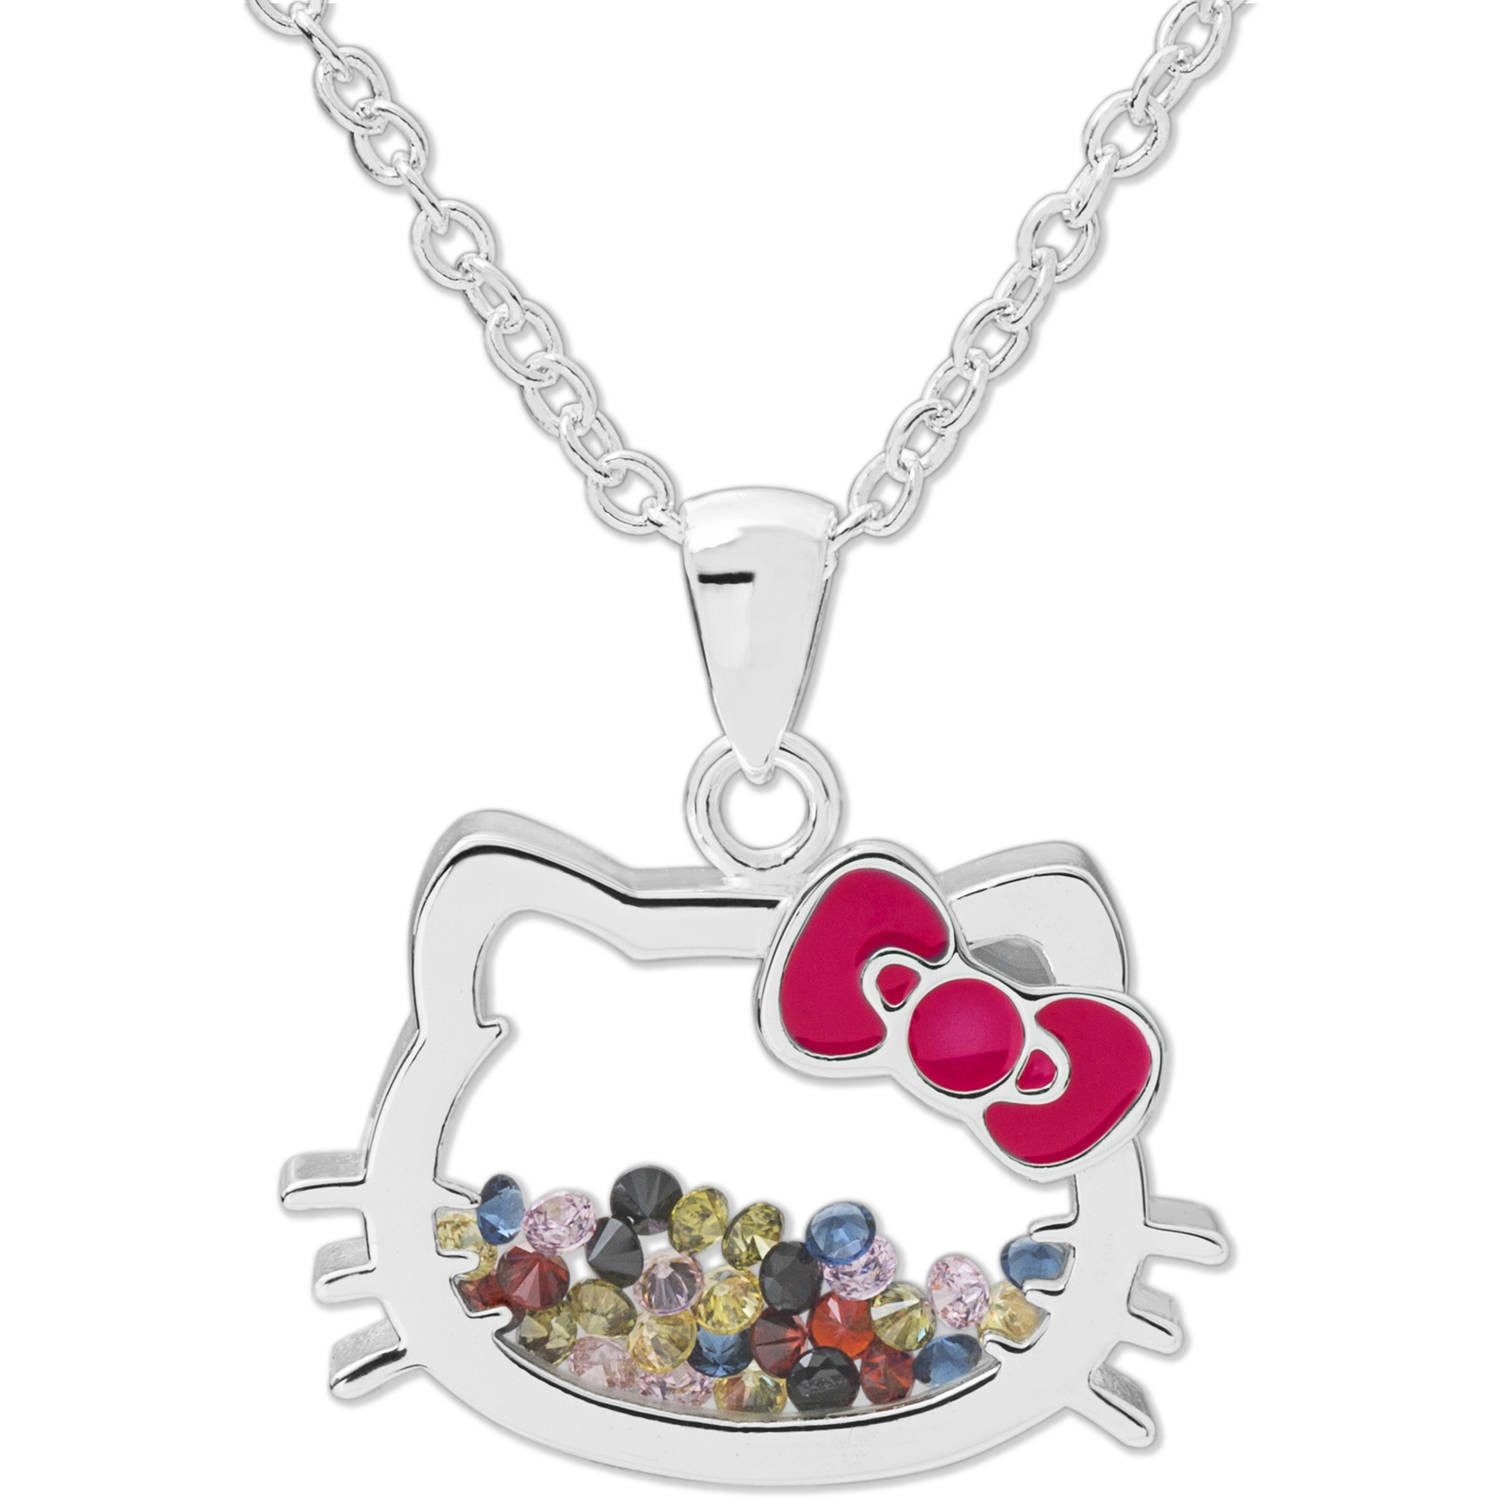 Hello Kitty Necklace
 Personalized Hello Kitty Sterling Silver Name Necklace 16